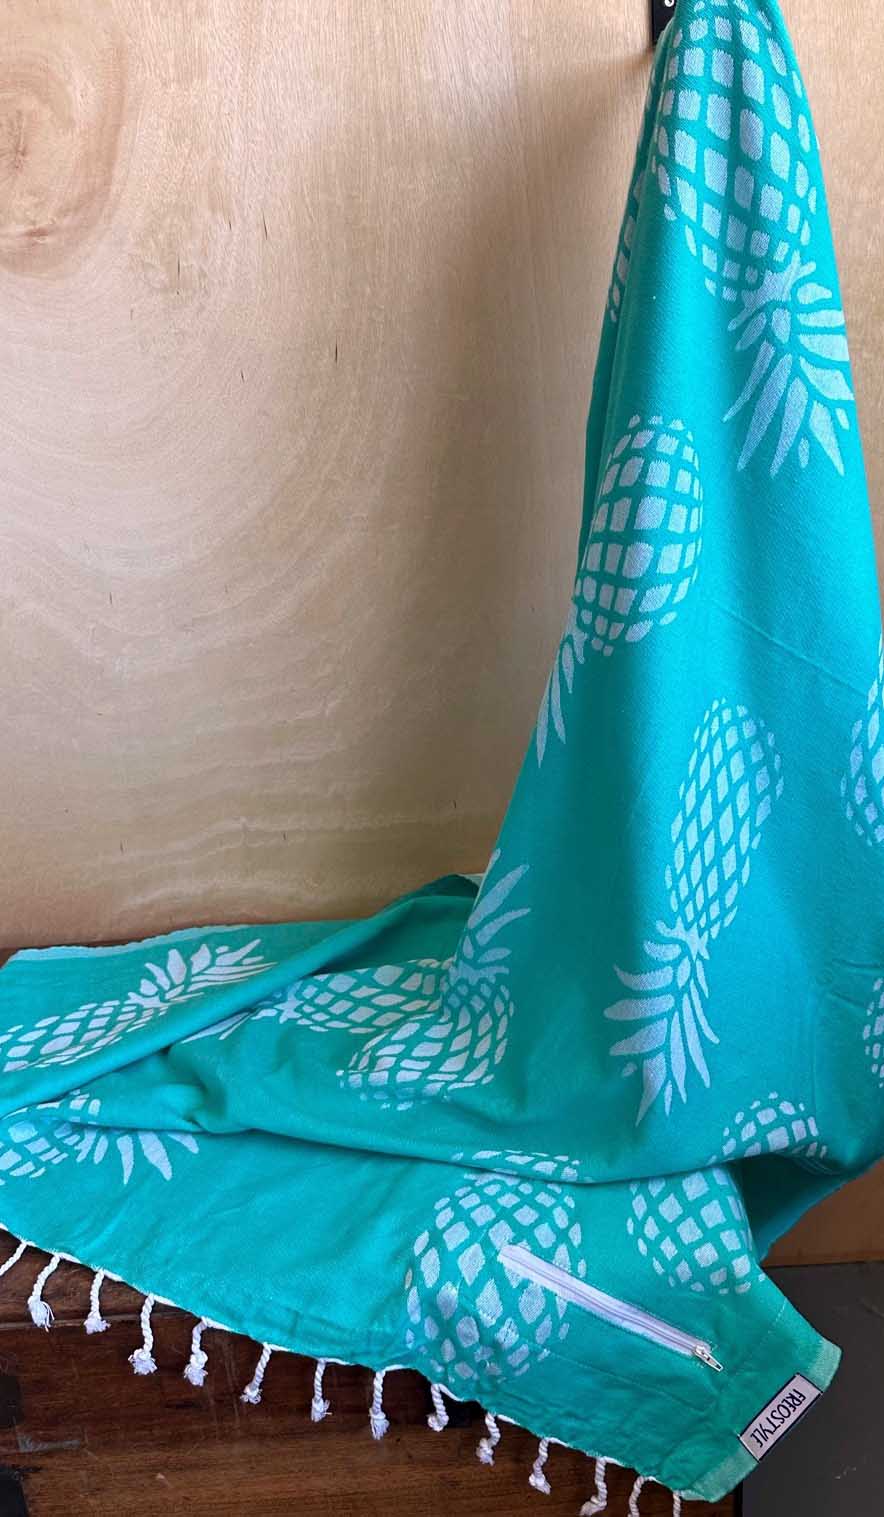 Pineapple Mint Turkish Towel with Pockets by Freostyle, displayed